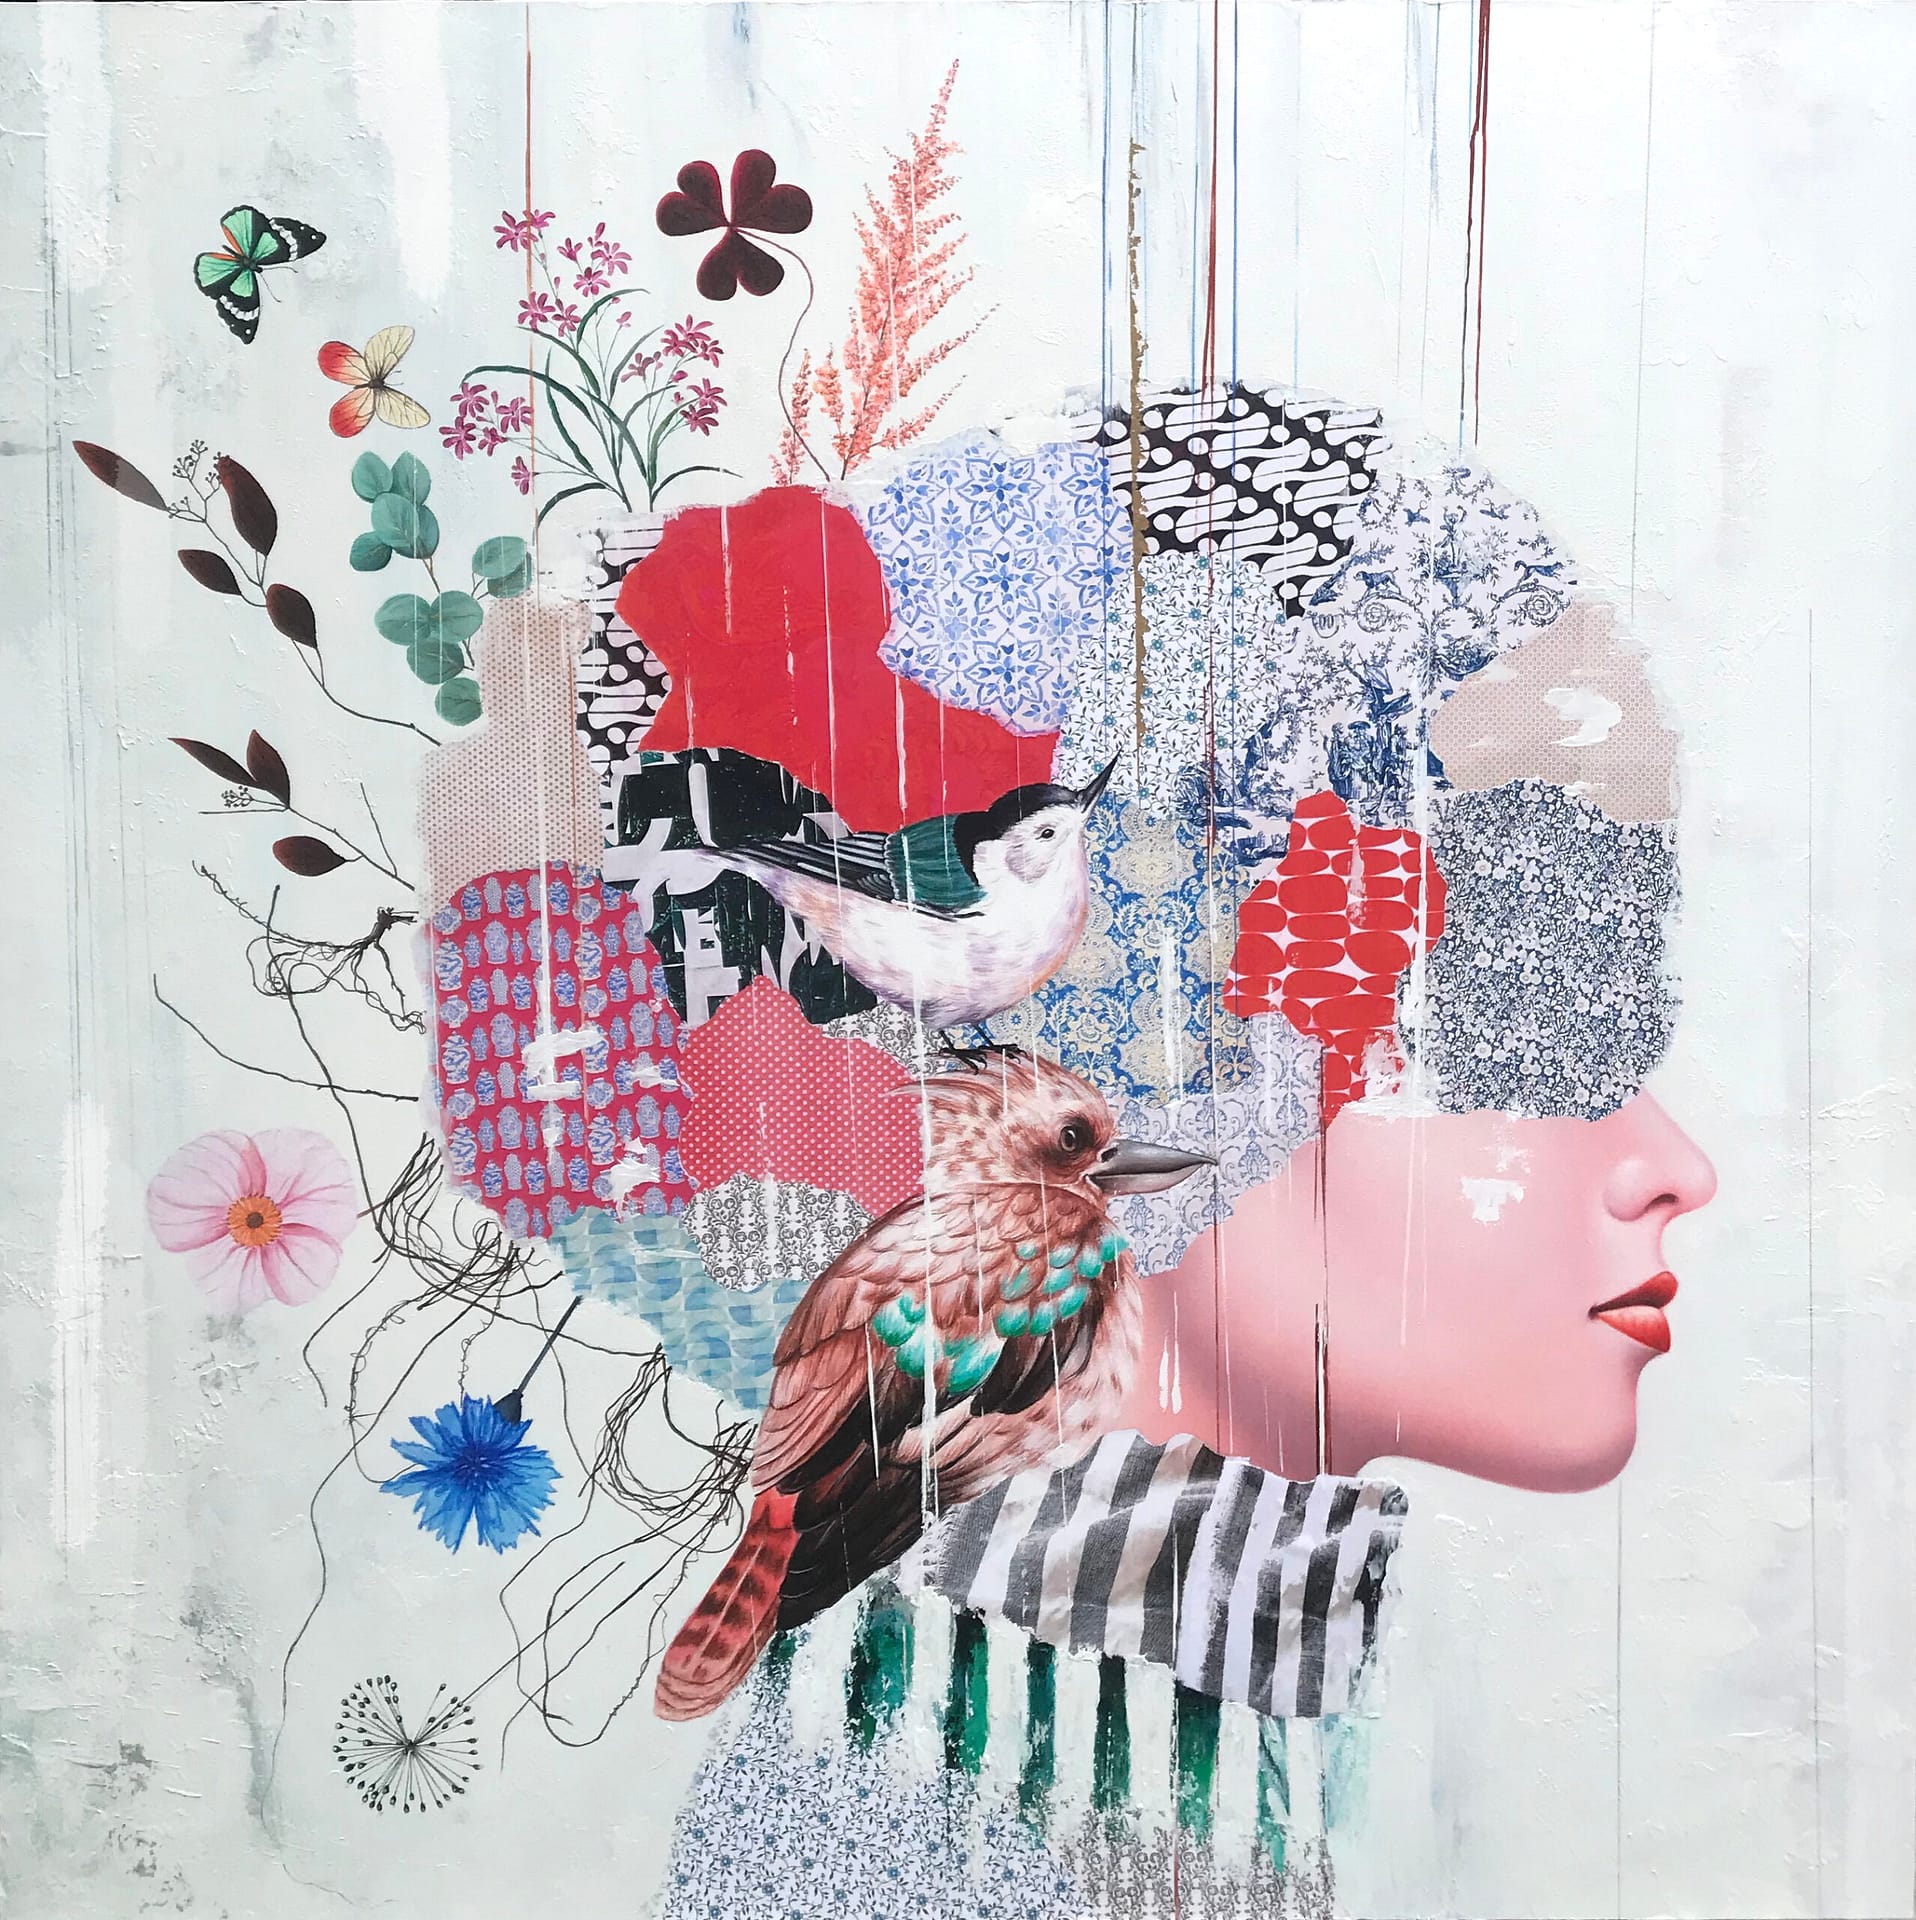 OPENING UP – 130×130 cm